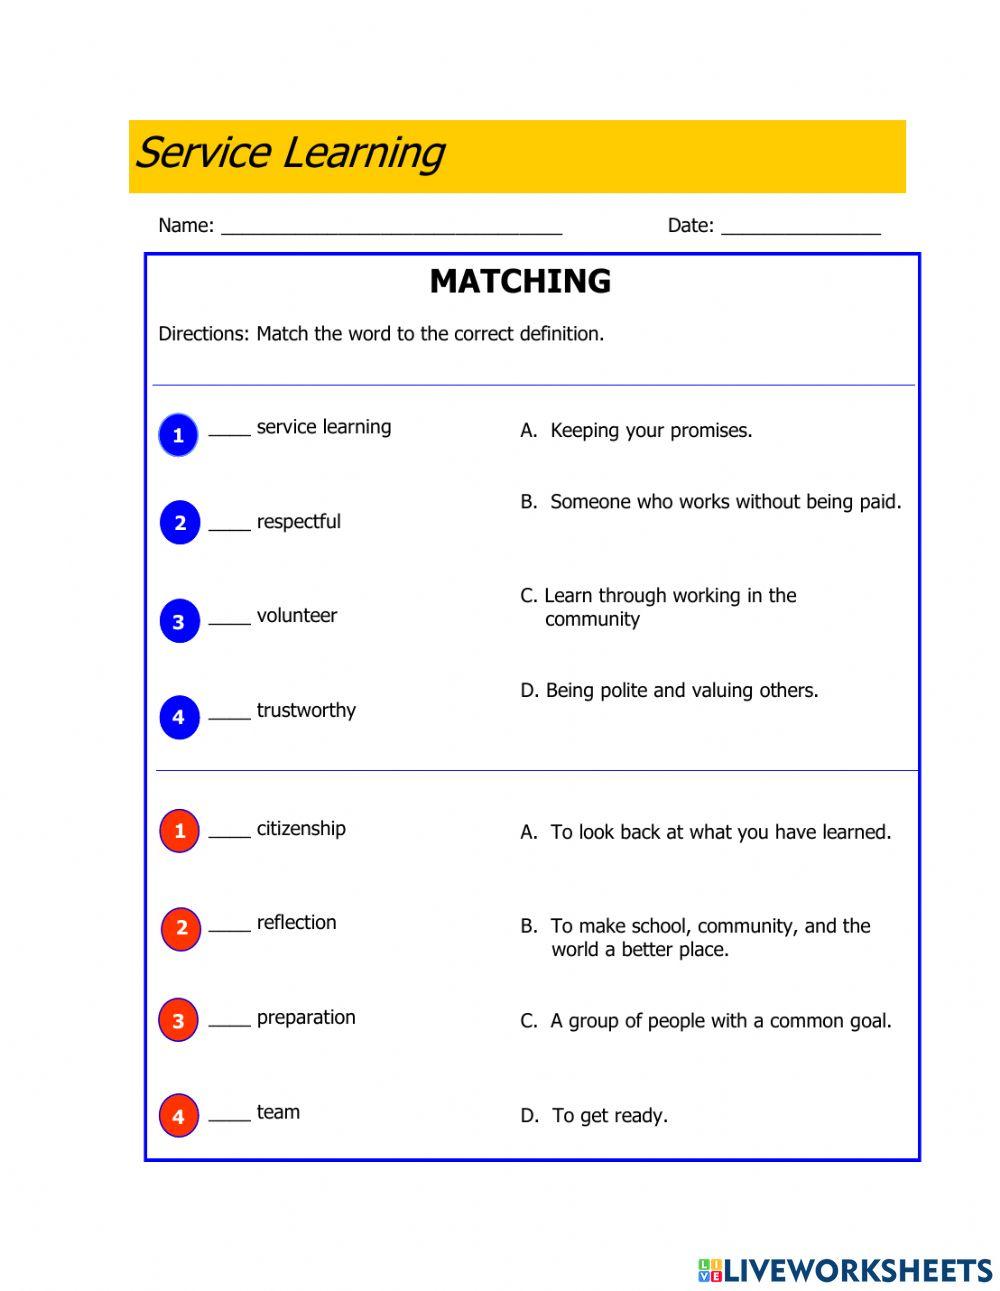 Service Learning Matching